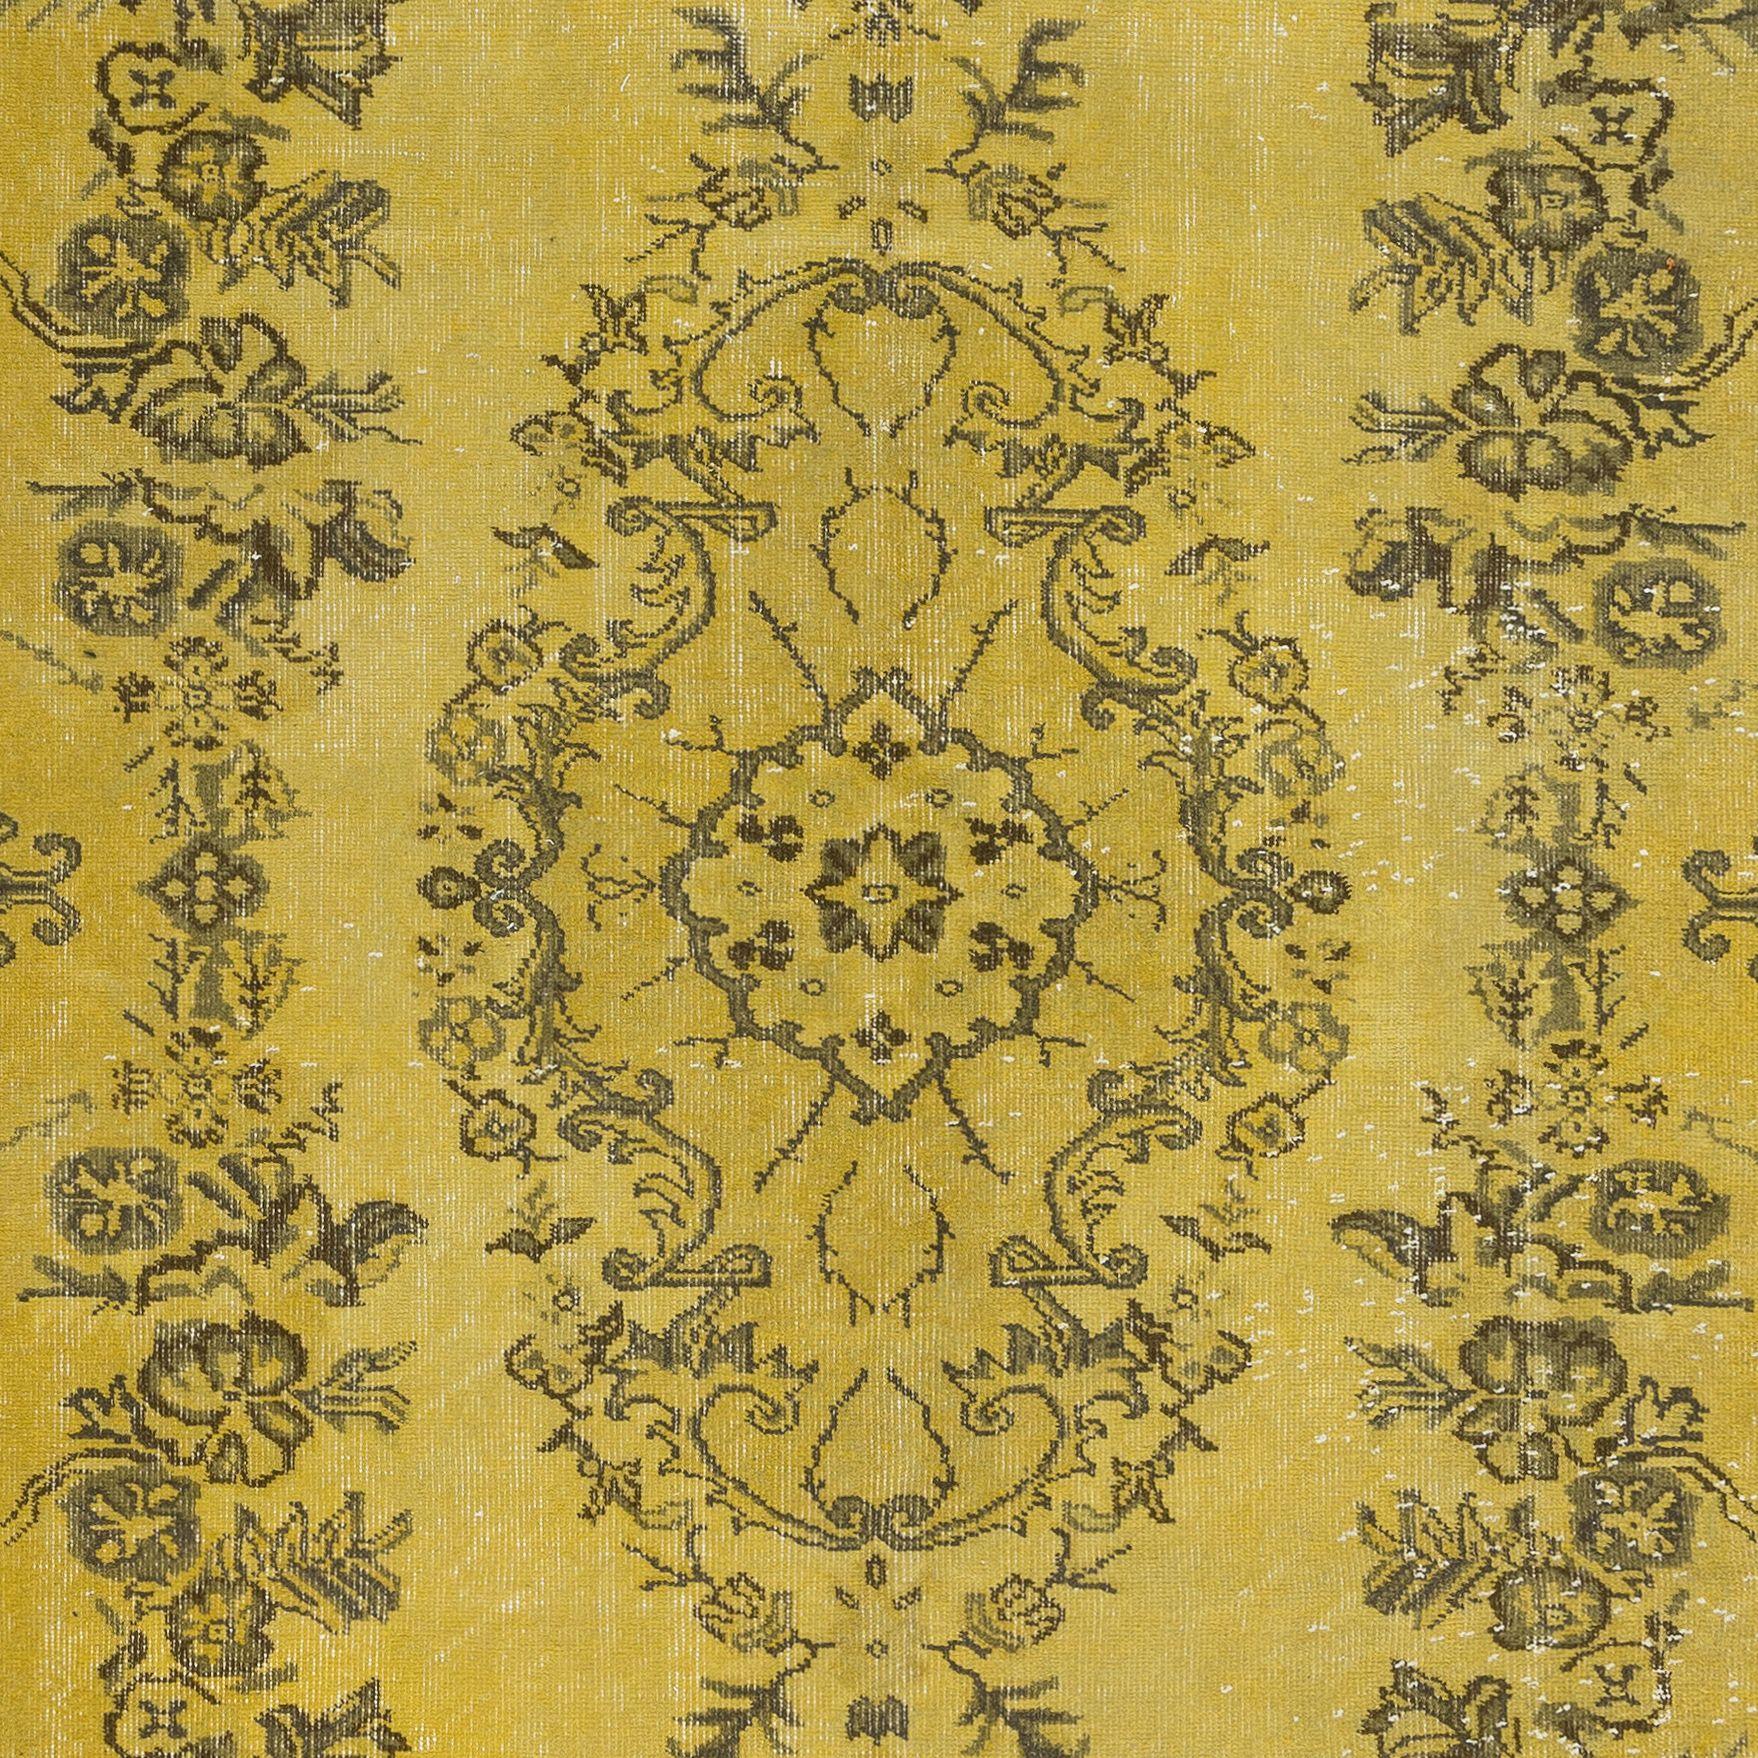 Hand-Woven 5.8x9.3 Ft Modern Handmade Turkish Rug with Medallion Design & Yellow Background For Sale